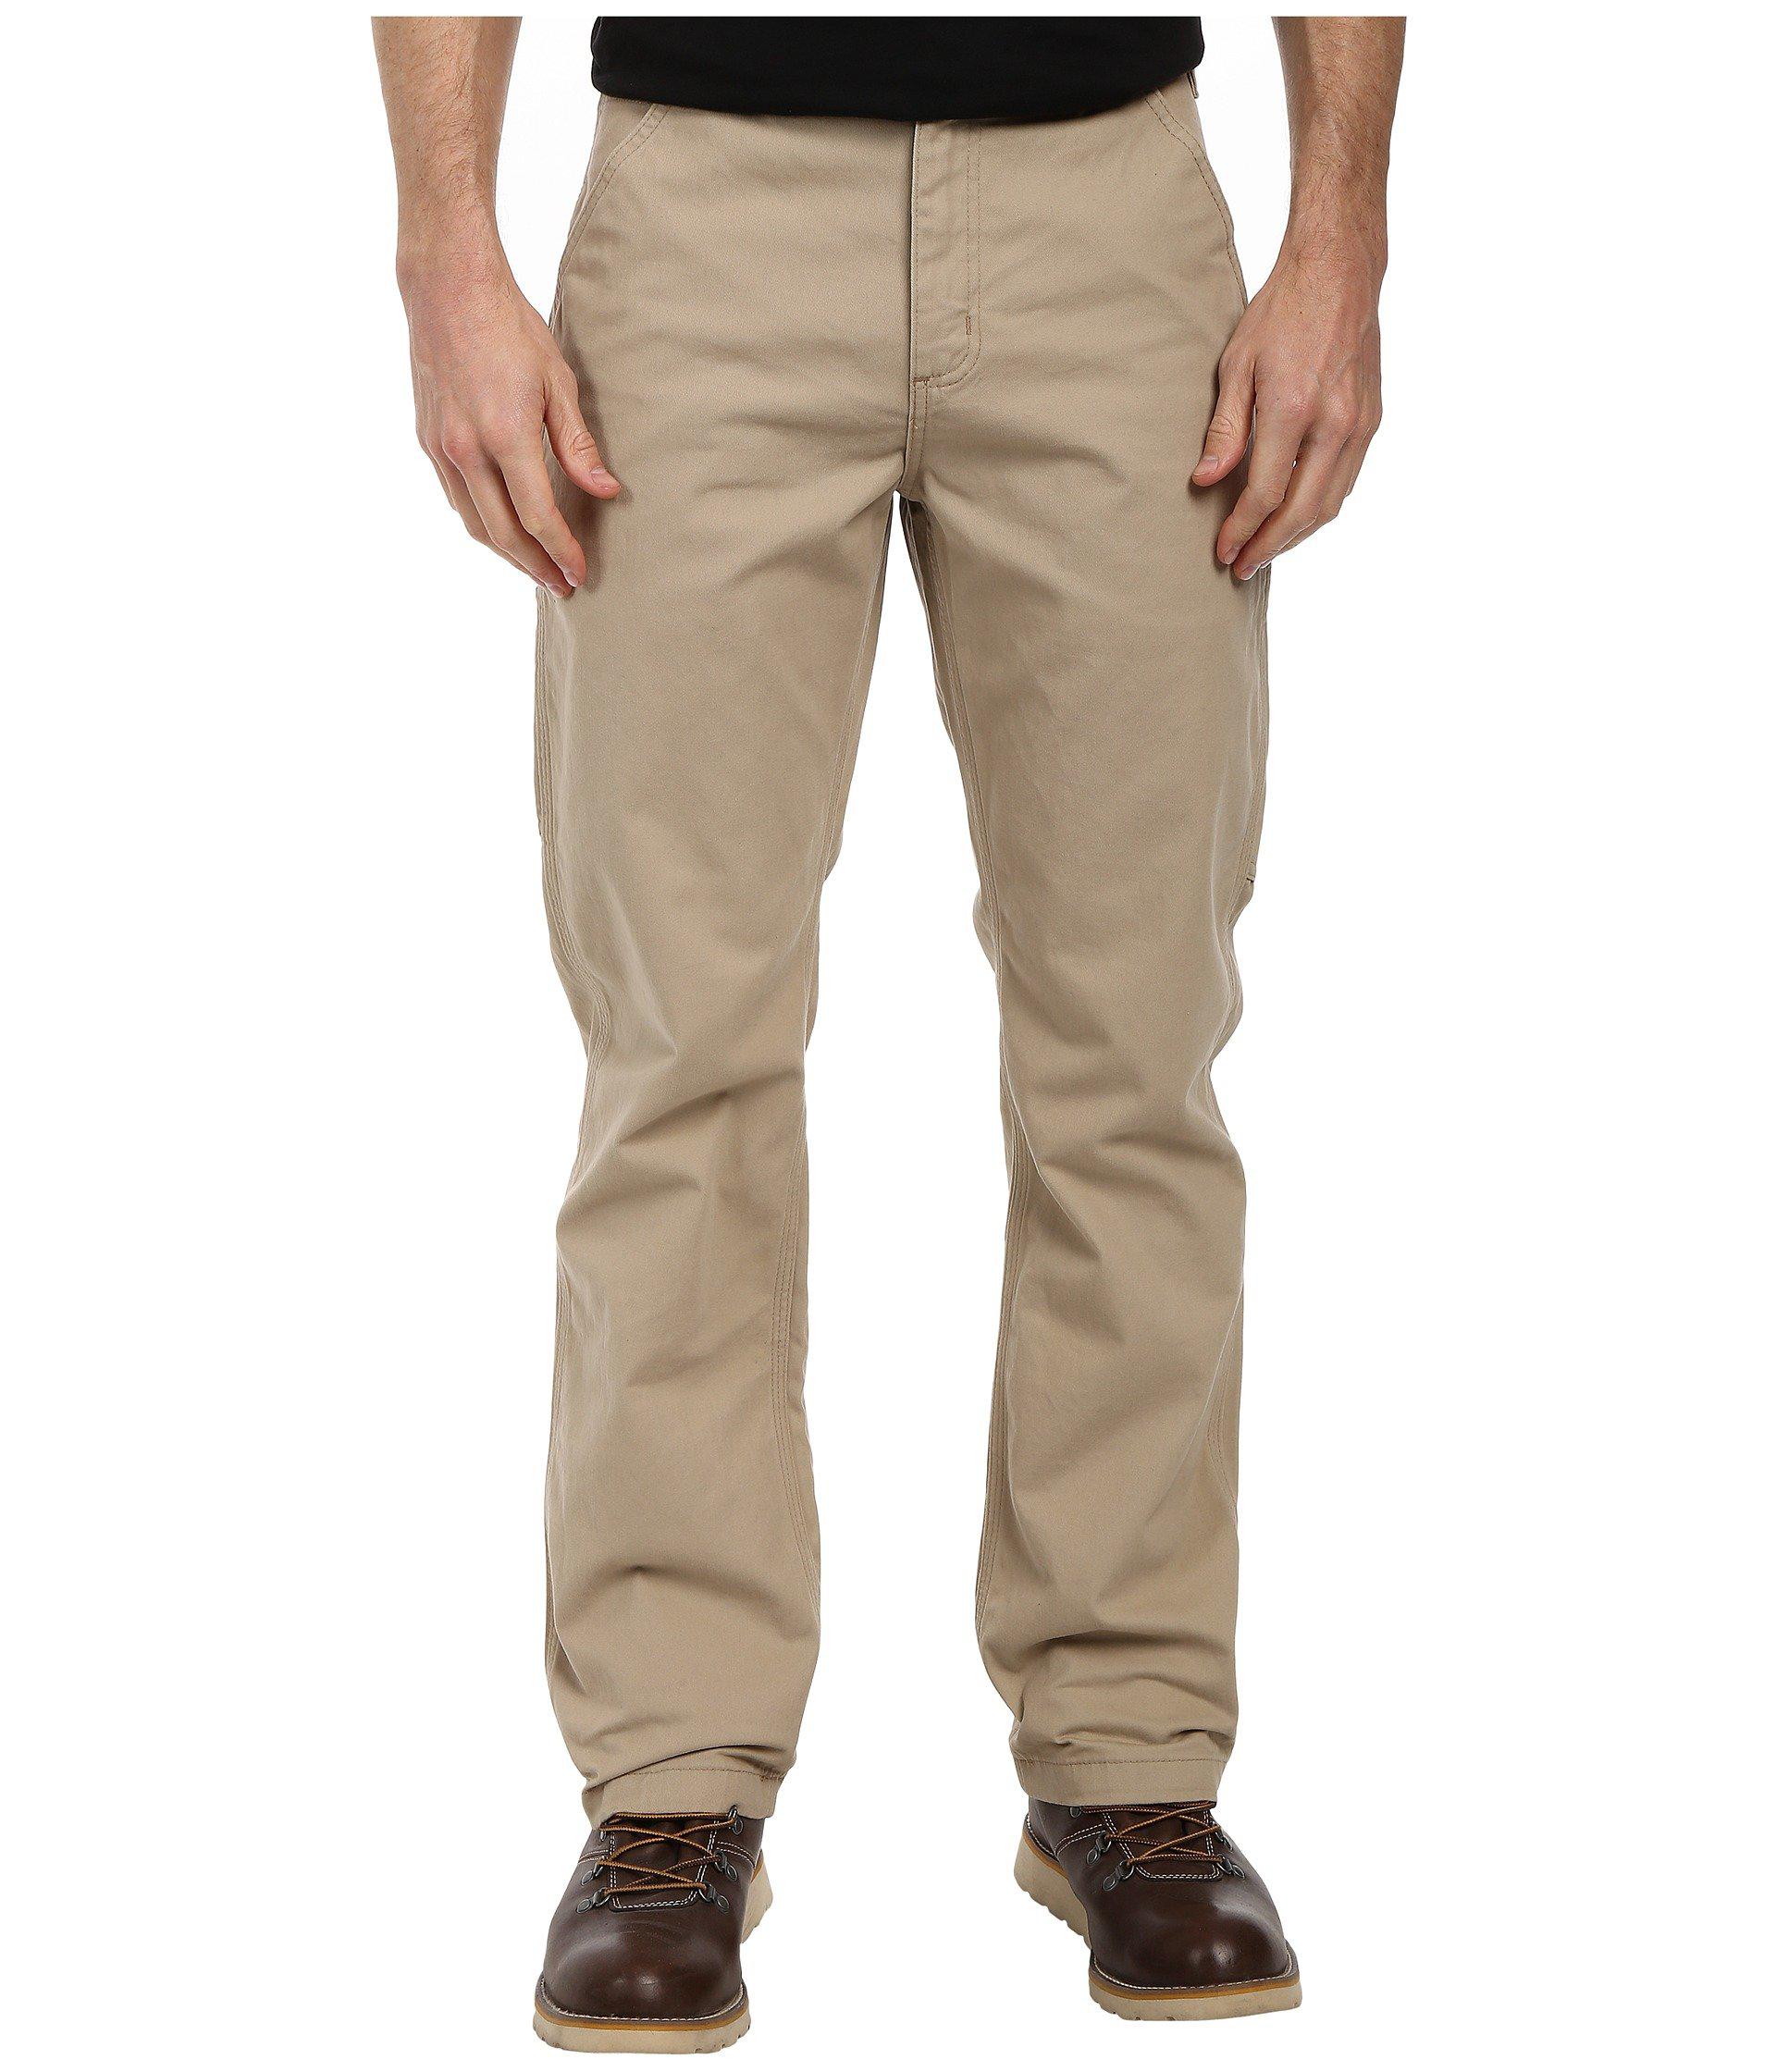 Lyst - Carhartt Washed Twill Dungaree (field Khaki) Men's Jeans in ...